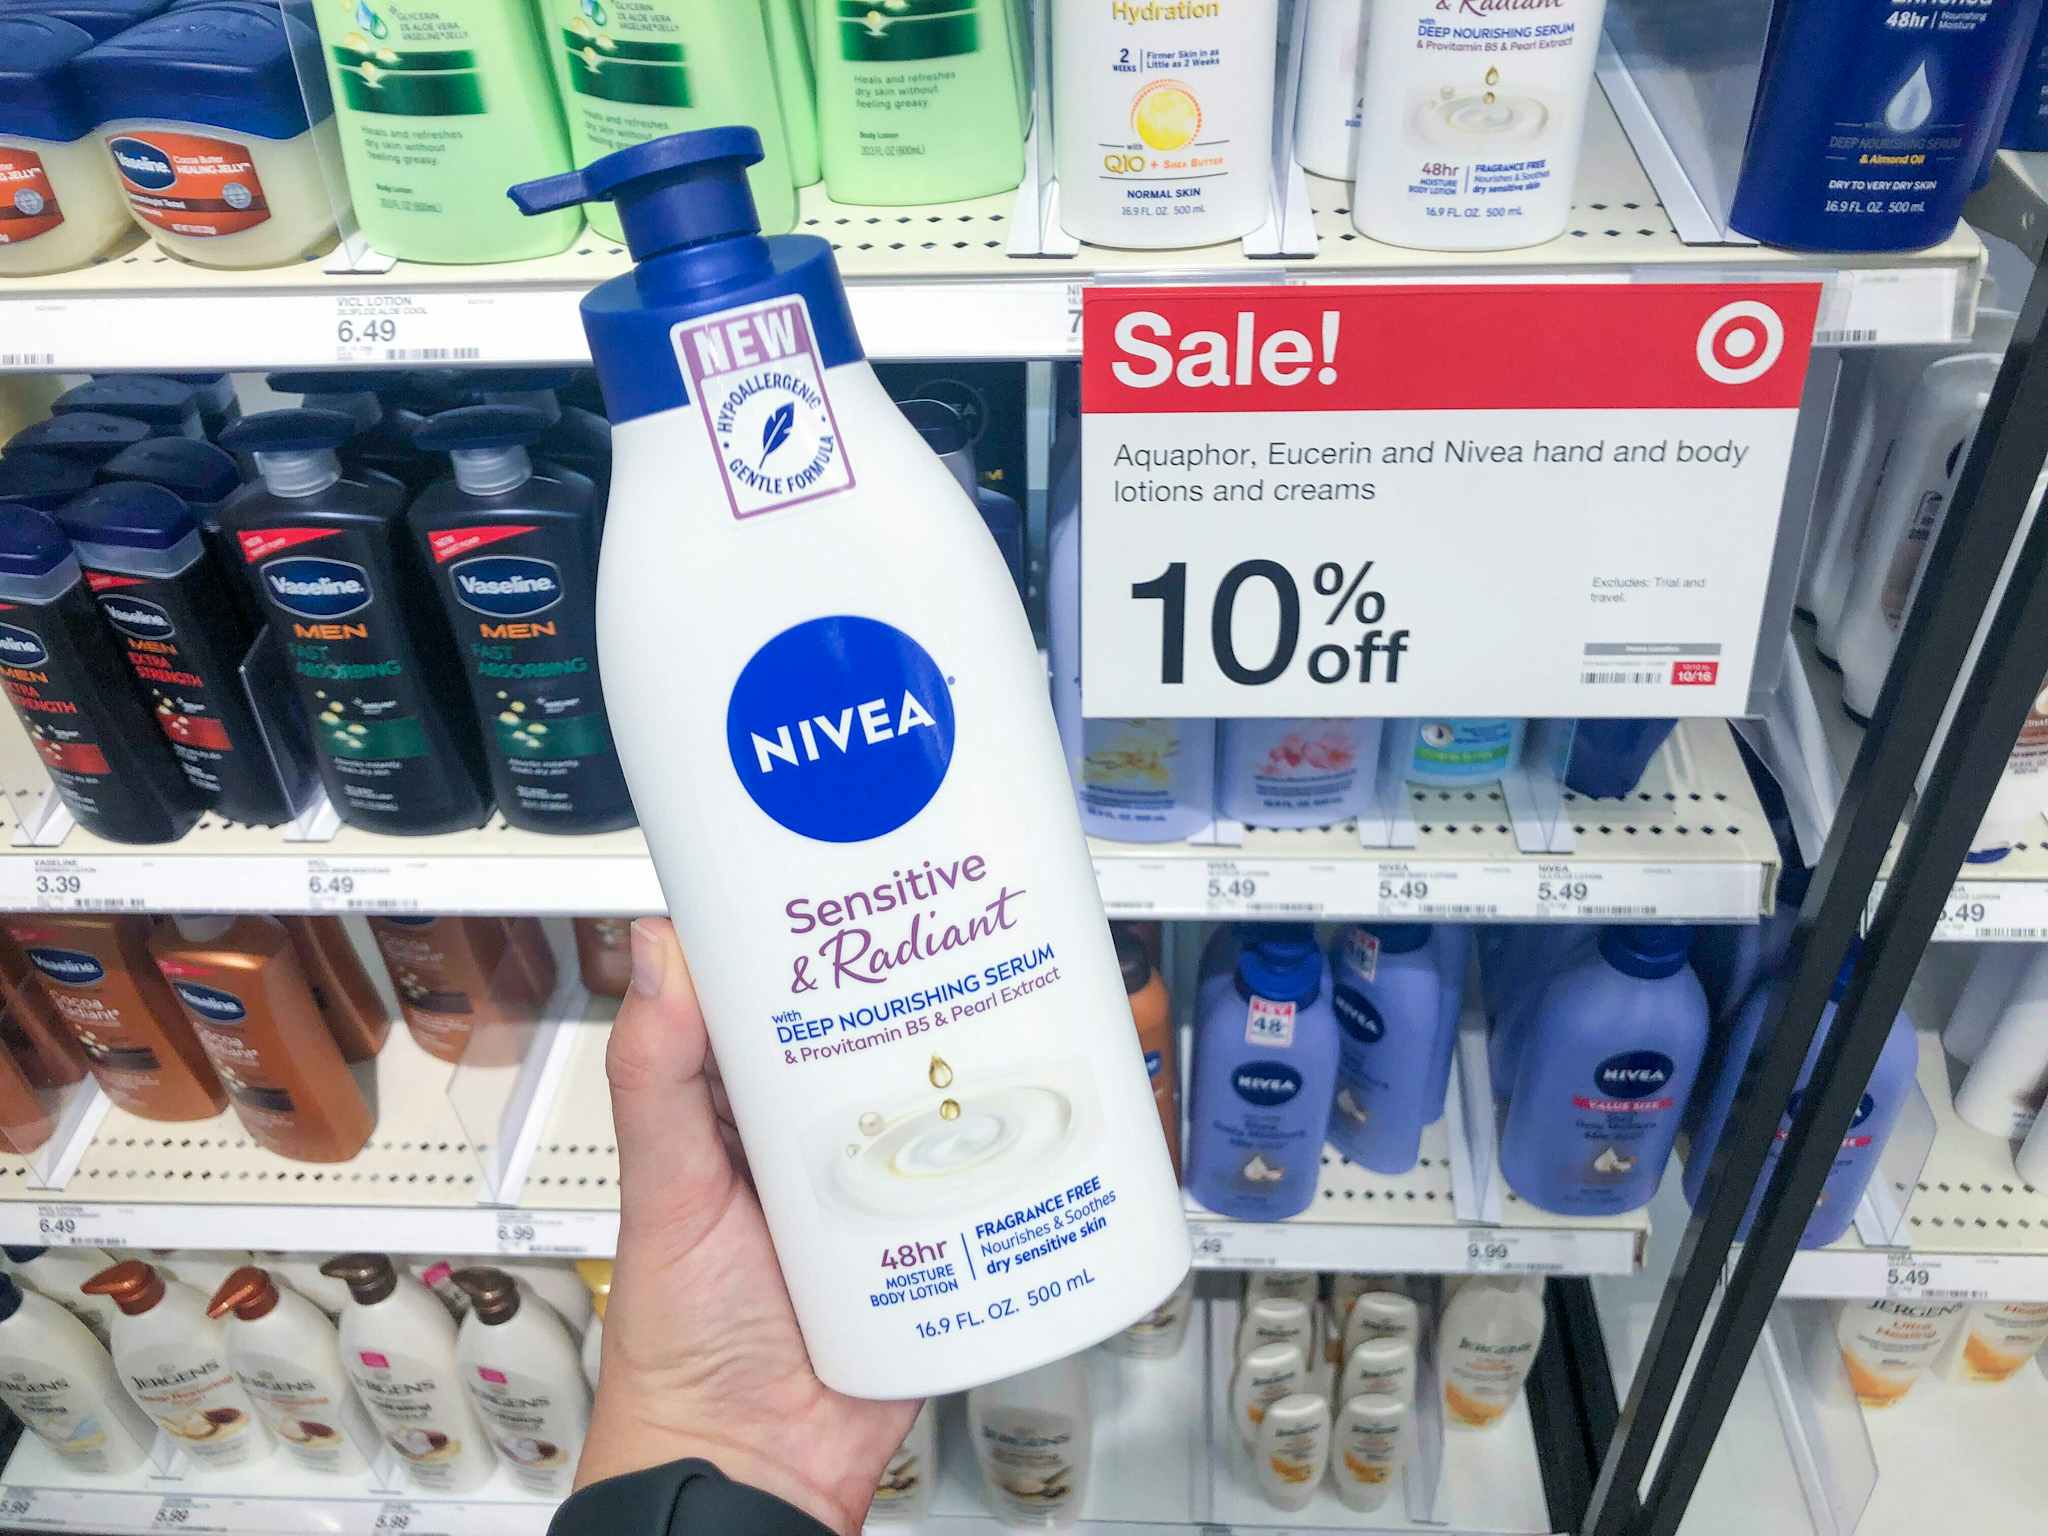 hand holding a bottle of nivea sensitive and radiant lotion in front of target sale sign